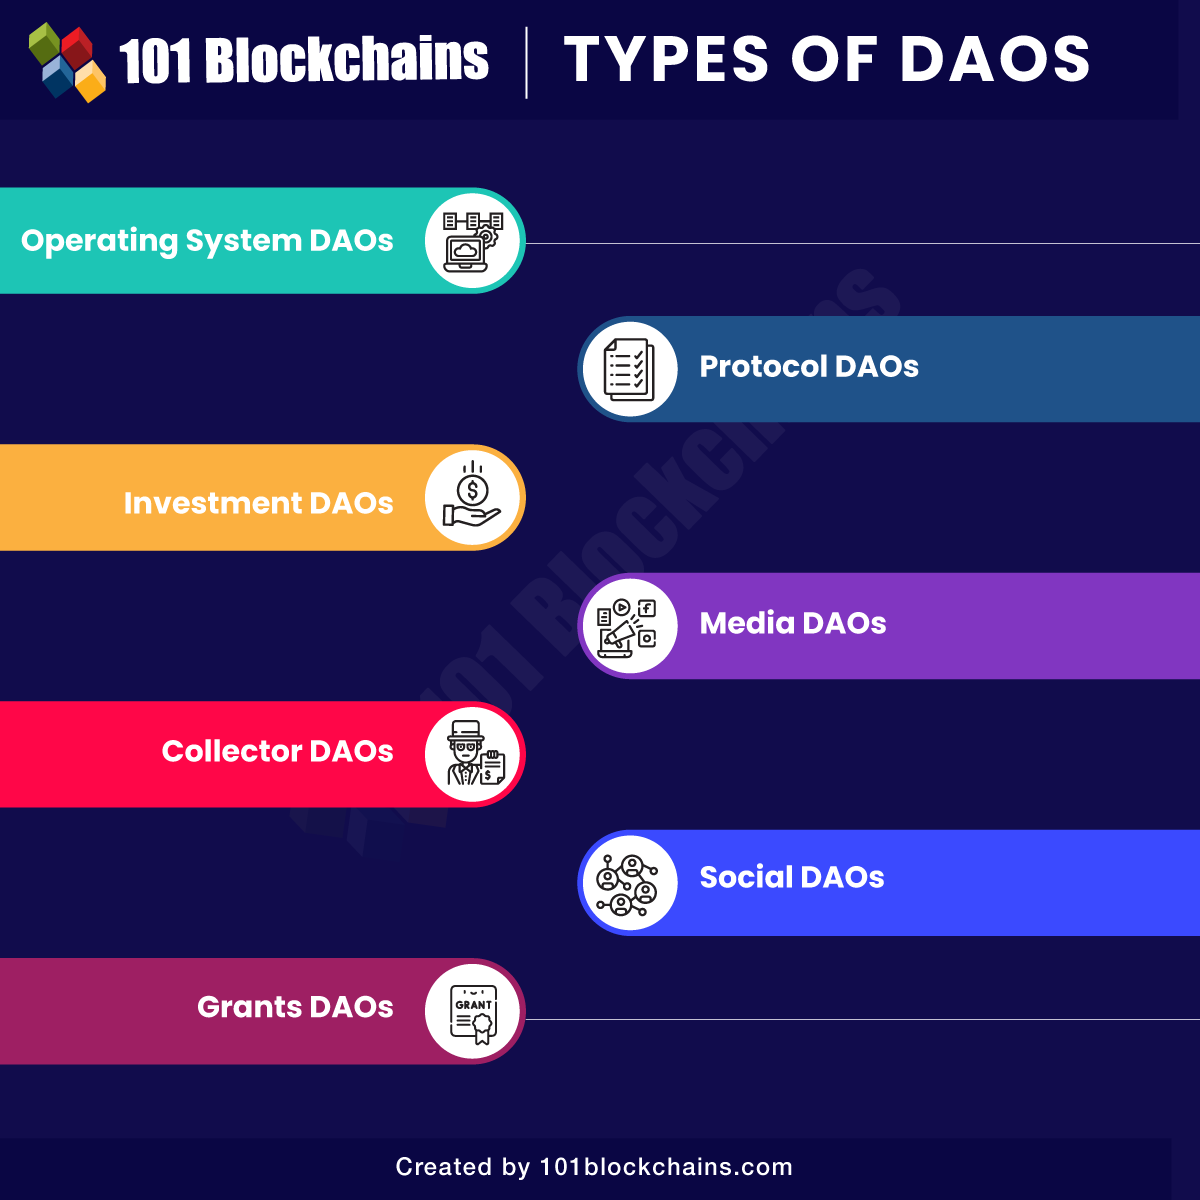 Types of DAOs